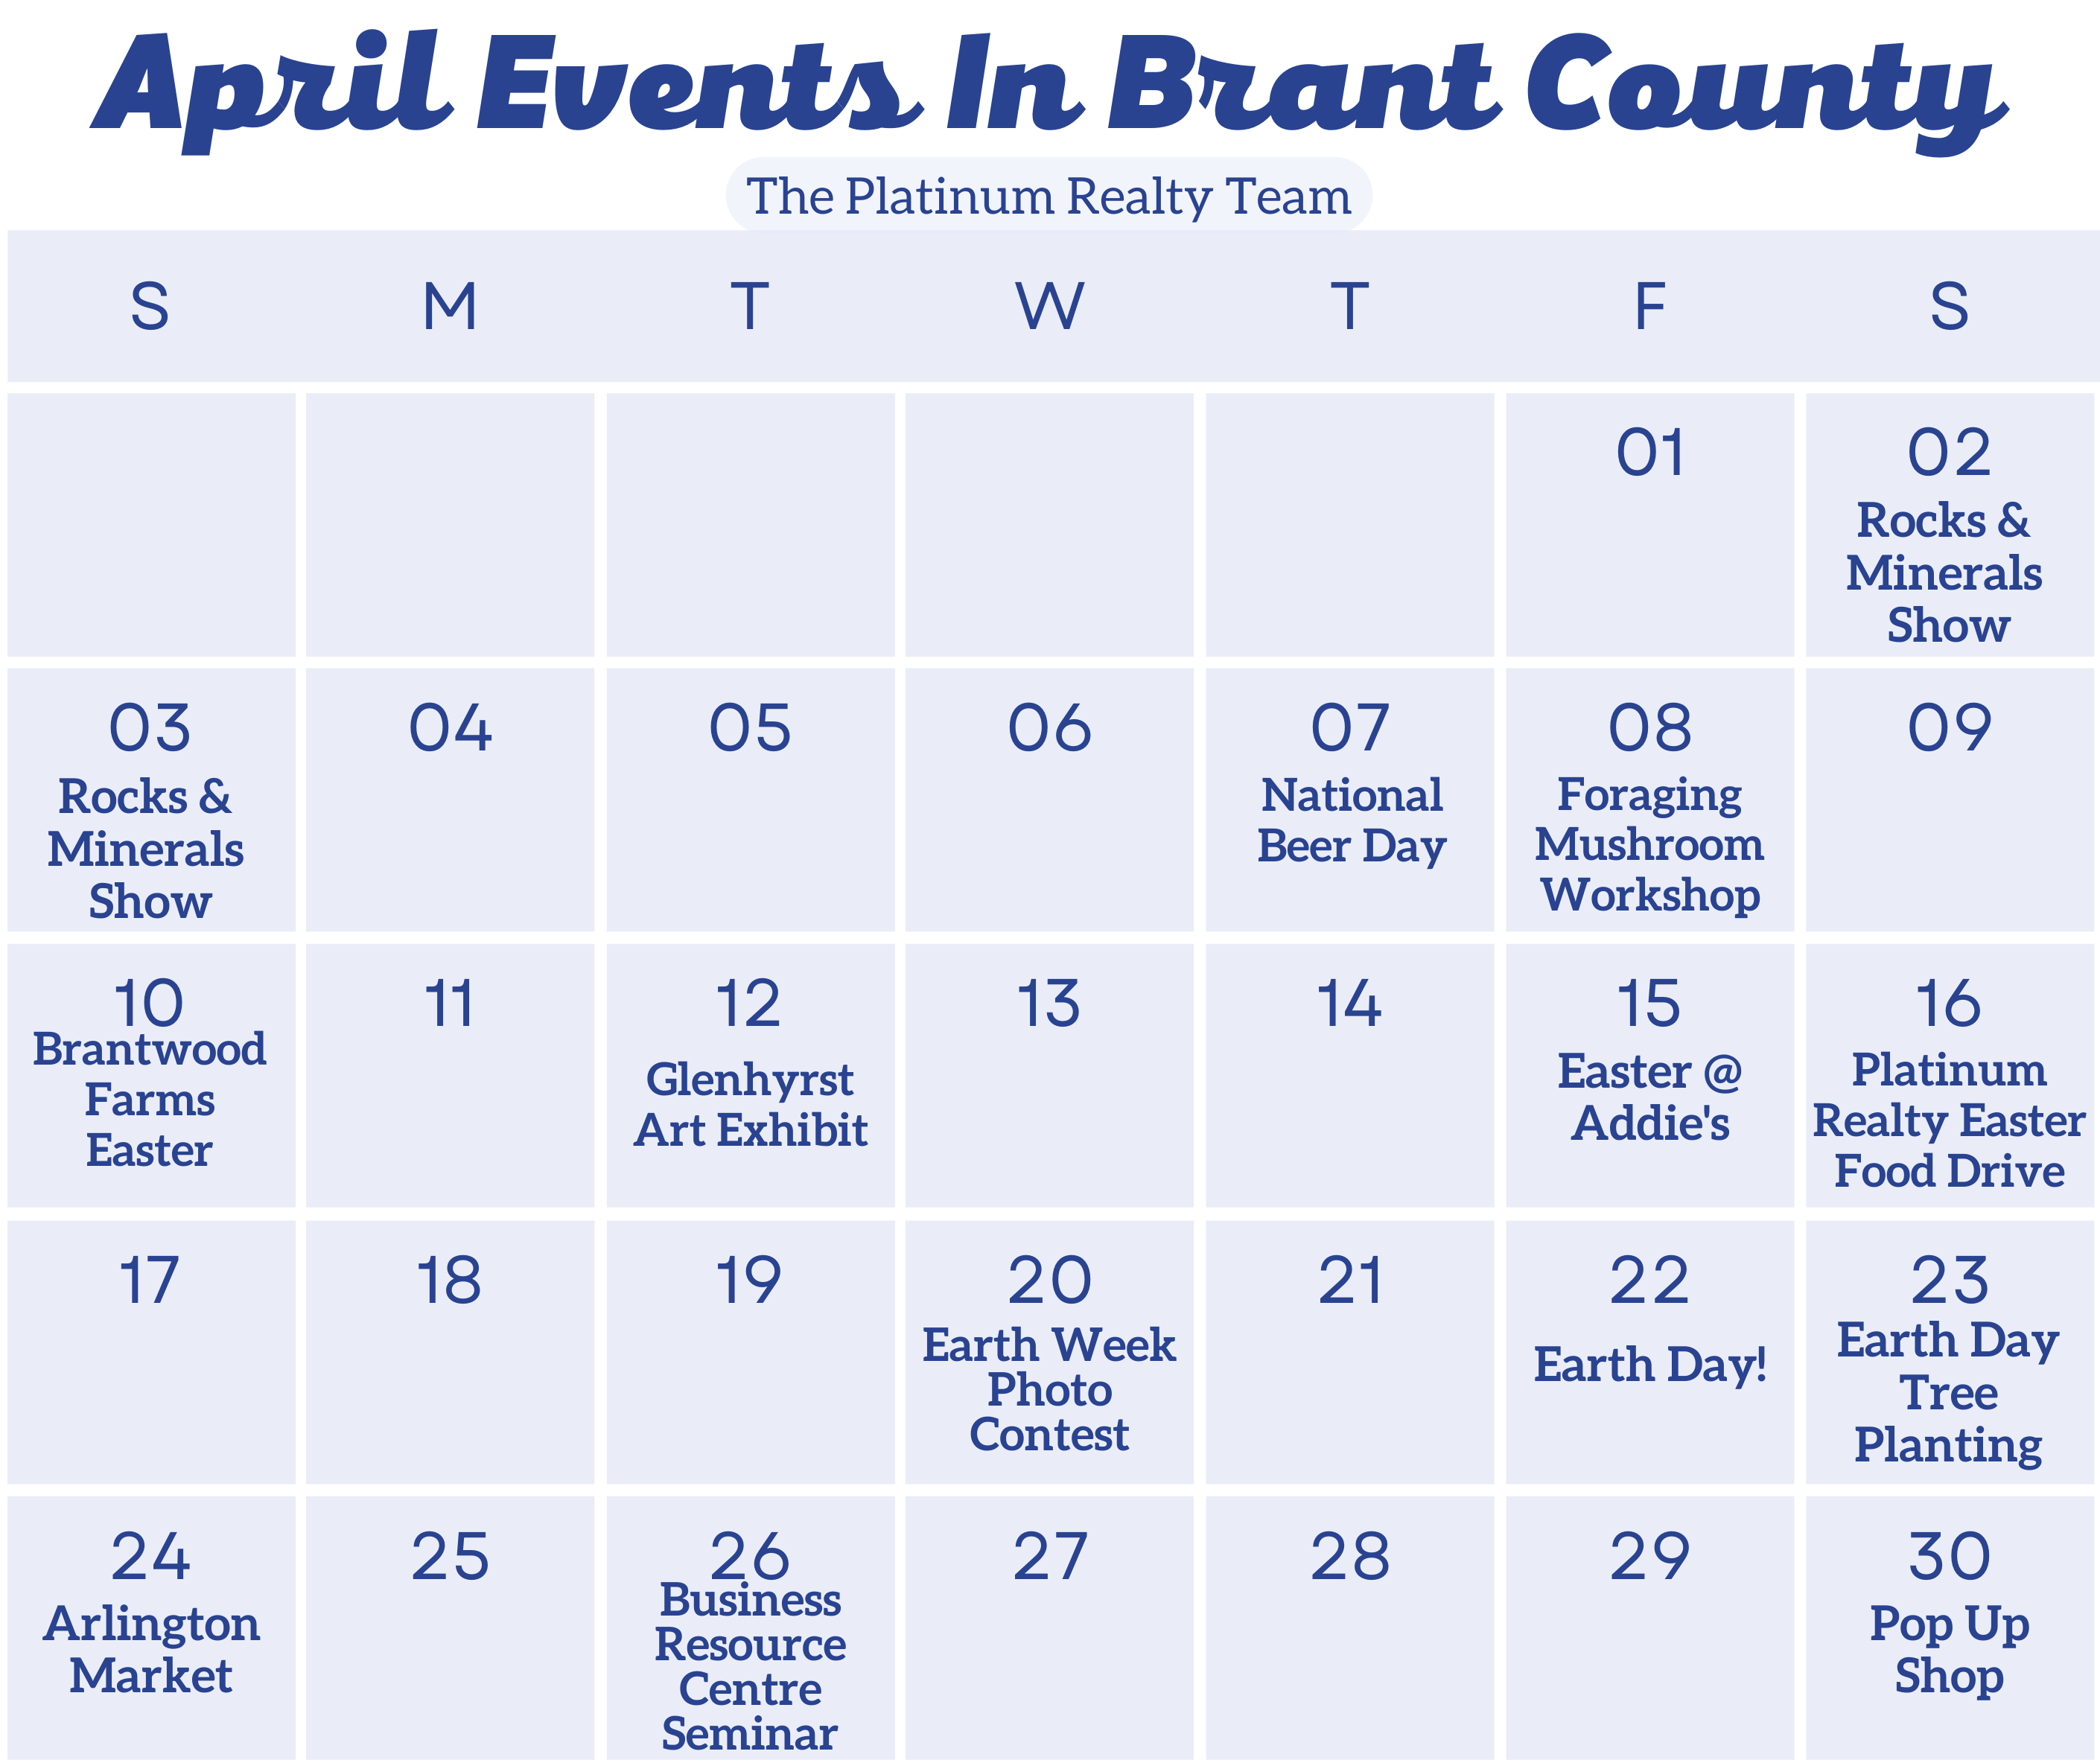 April Events In Brant County